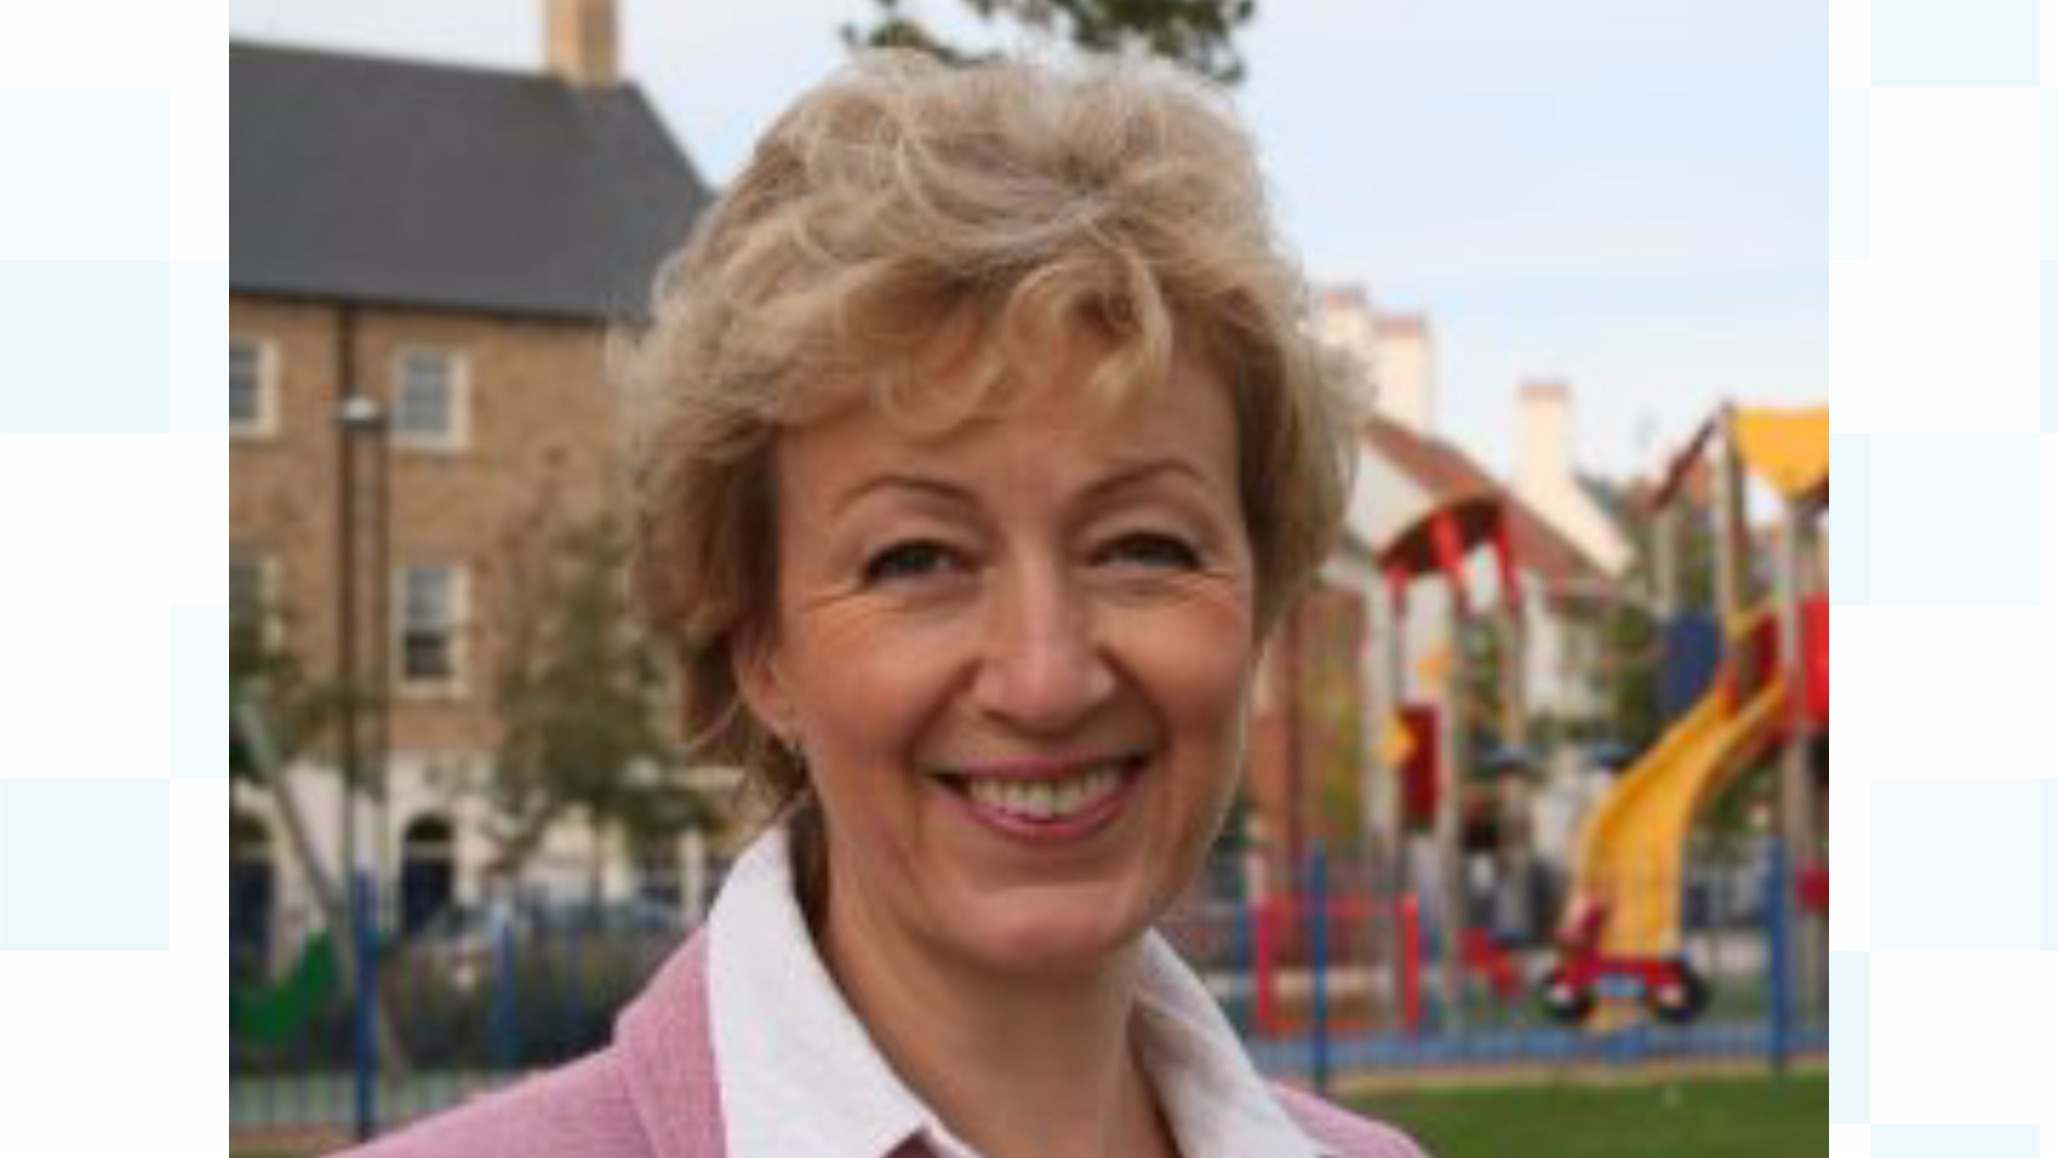 Andrea Leadsom - main contender to replace David Cameron as Conservative Party leader and Prime Minister